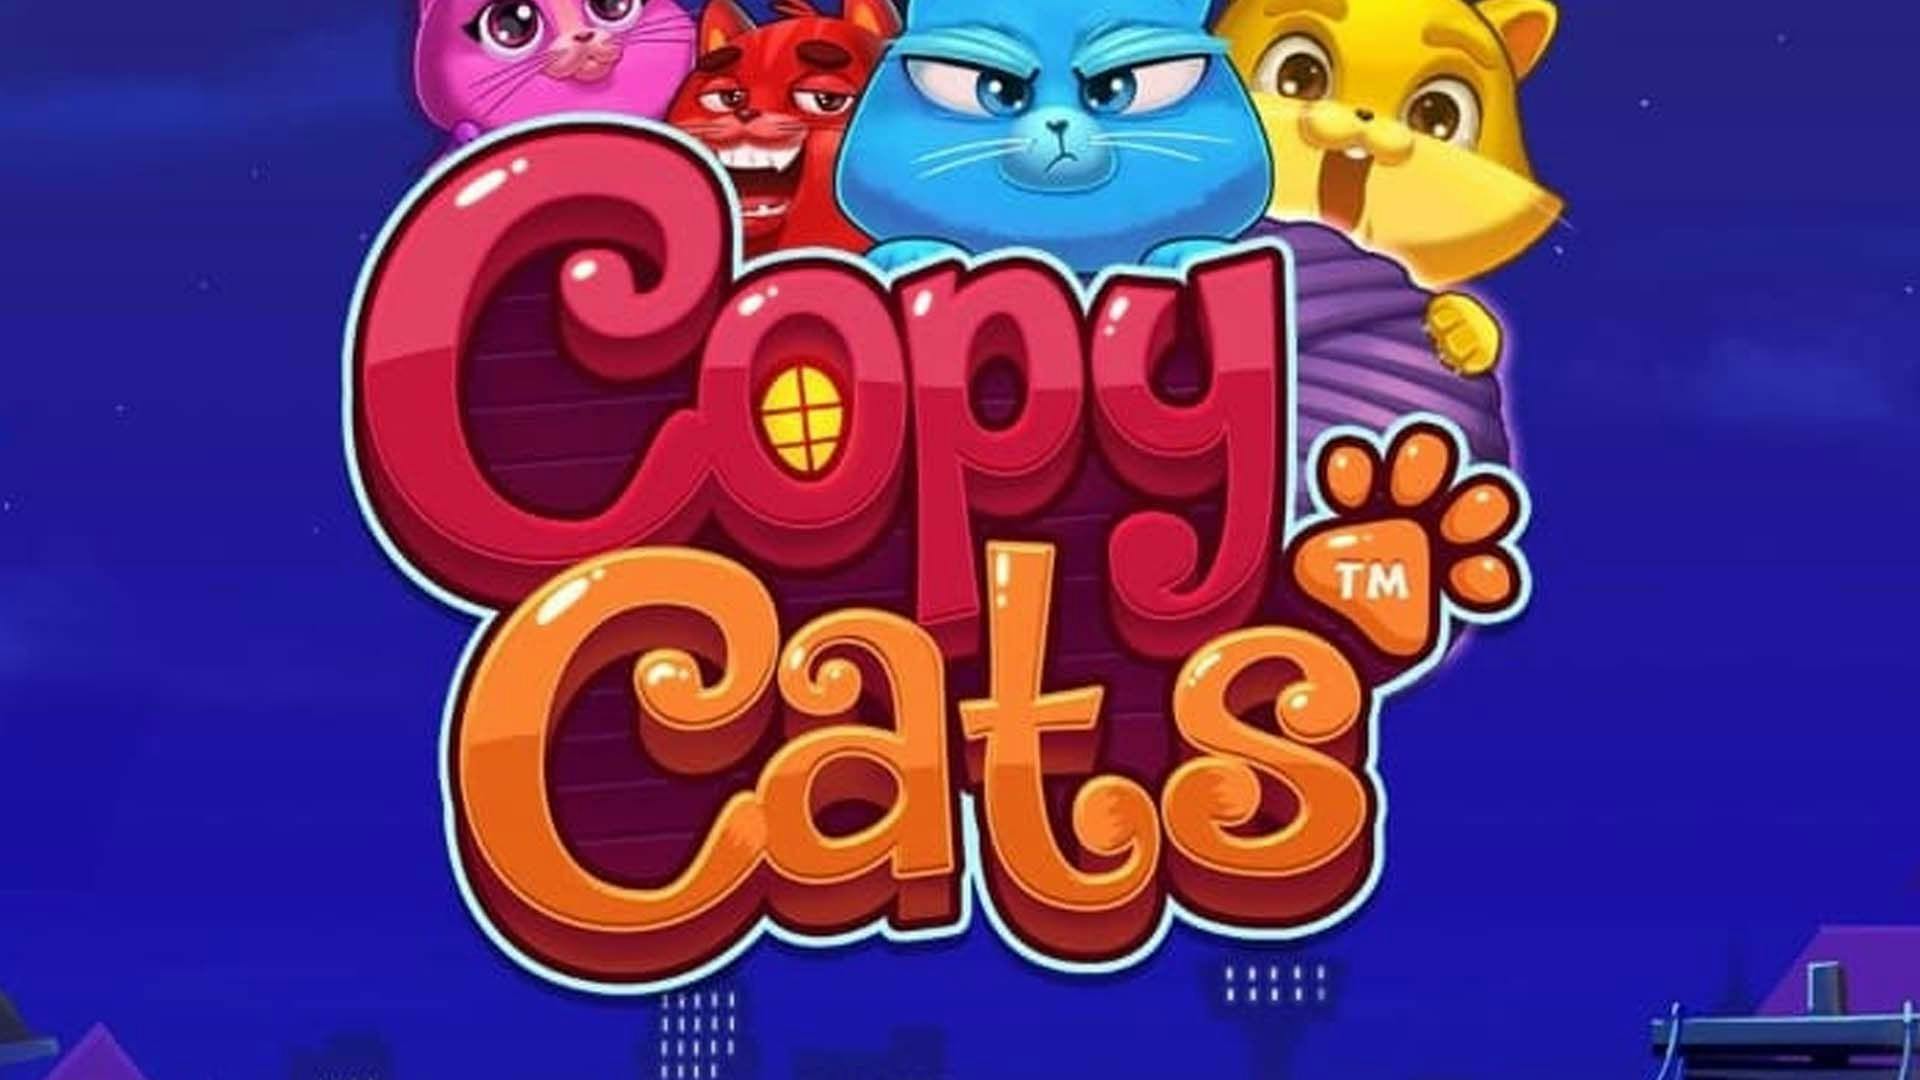 Copy Cats Slot Machine Online Free Game